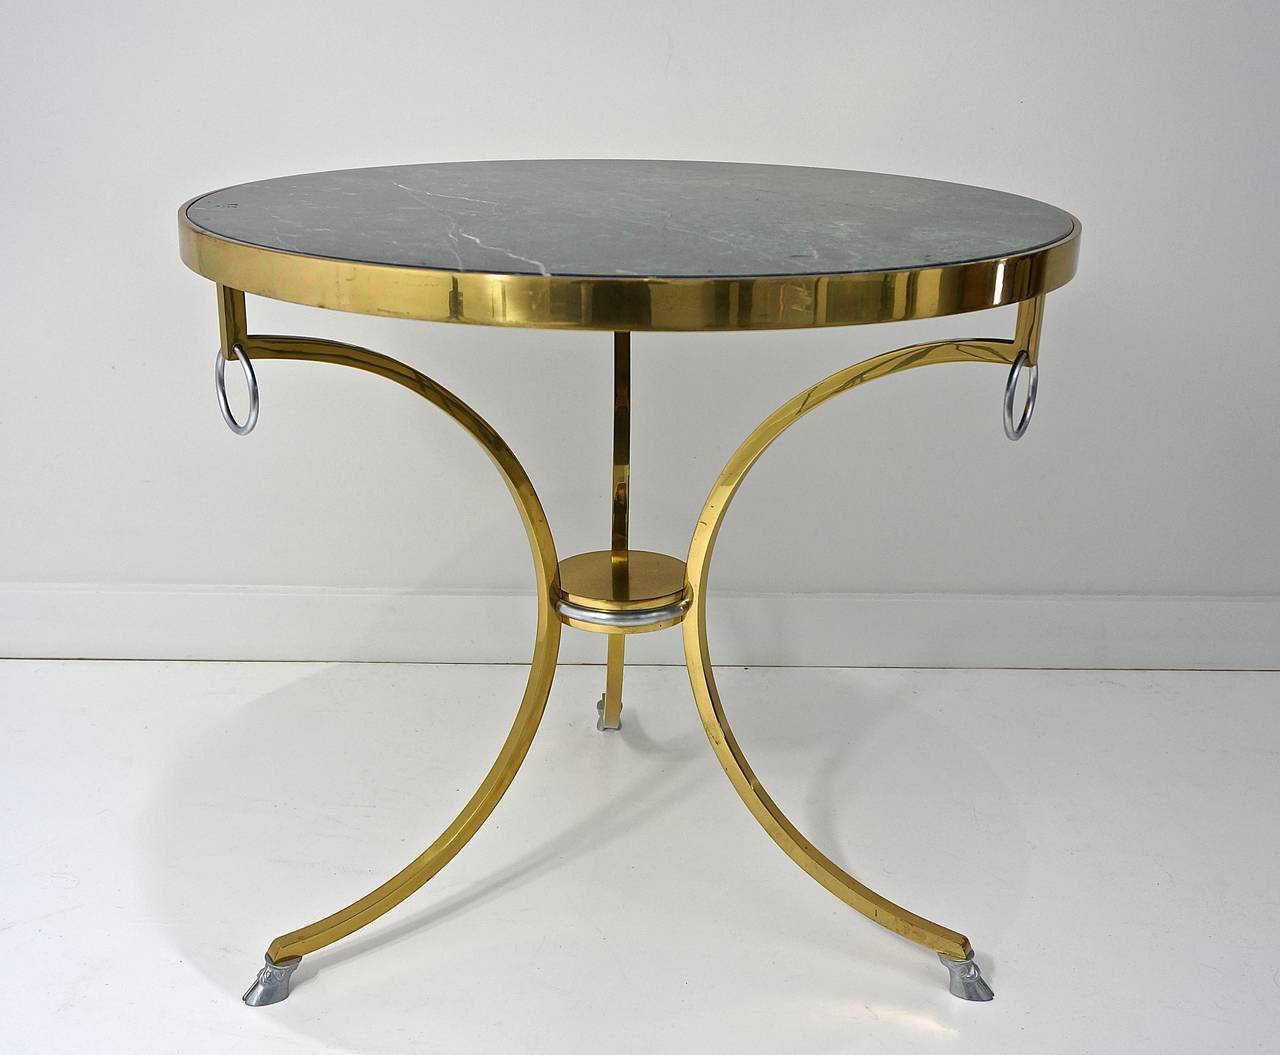 This vintage Neo Classic Italian Gueridon table is beautifully crafted with a polished brass apron and splayed-legs, topped with steel rings and terminating on steel doe hooves. The central support plateau is polished brass with a steel ring band.